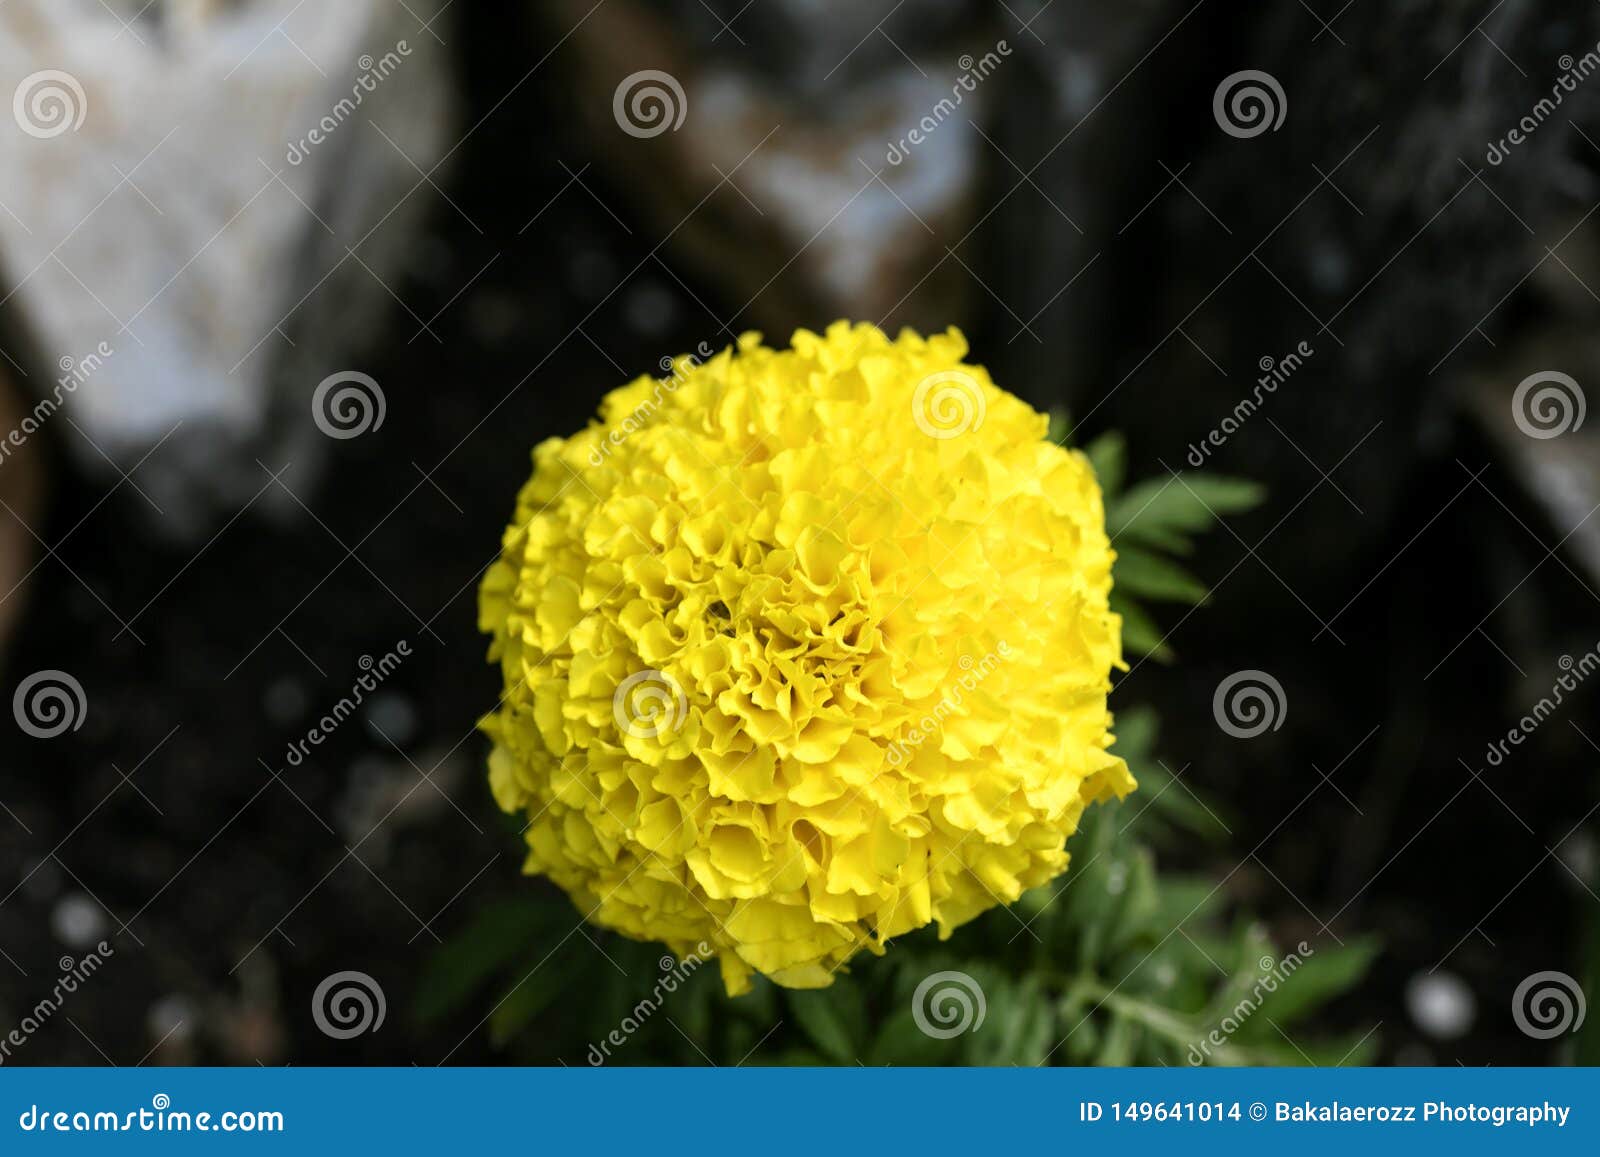 Yellow Marigold Flower Macro Background Wallpaper High Quality Prints 50,6  Megapixels Products Stock Photo - Image of macro, market: 149641014